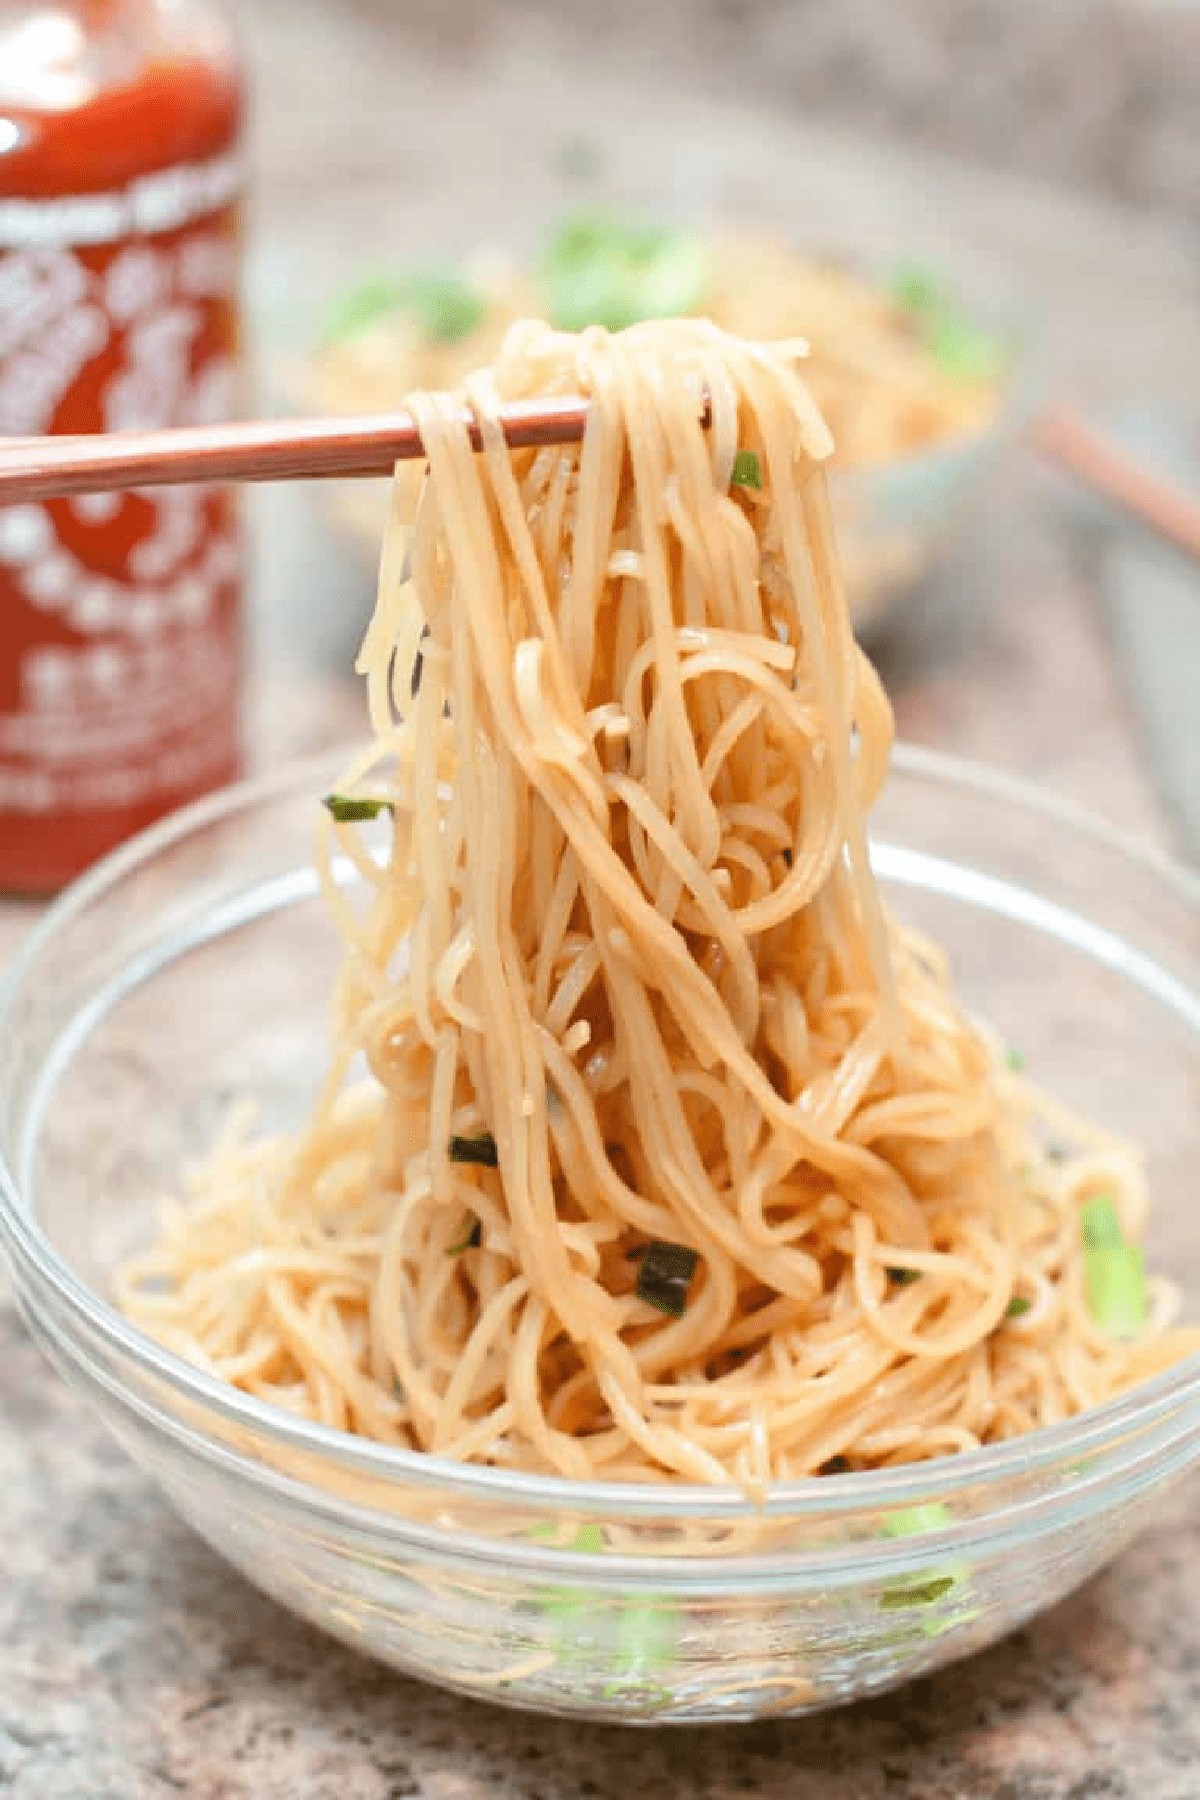 chopsticks holding up noodles with scallions.